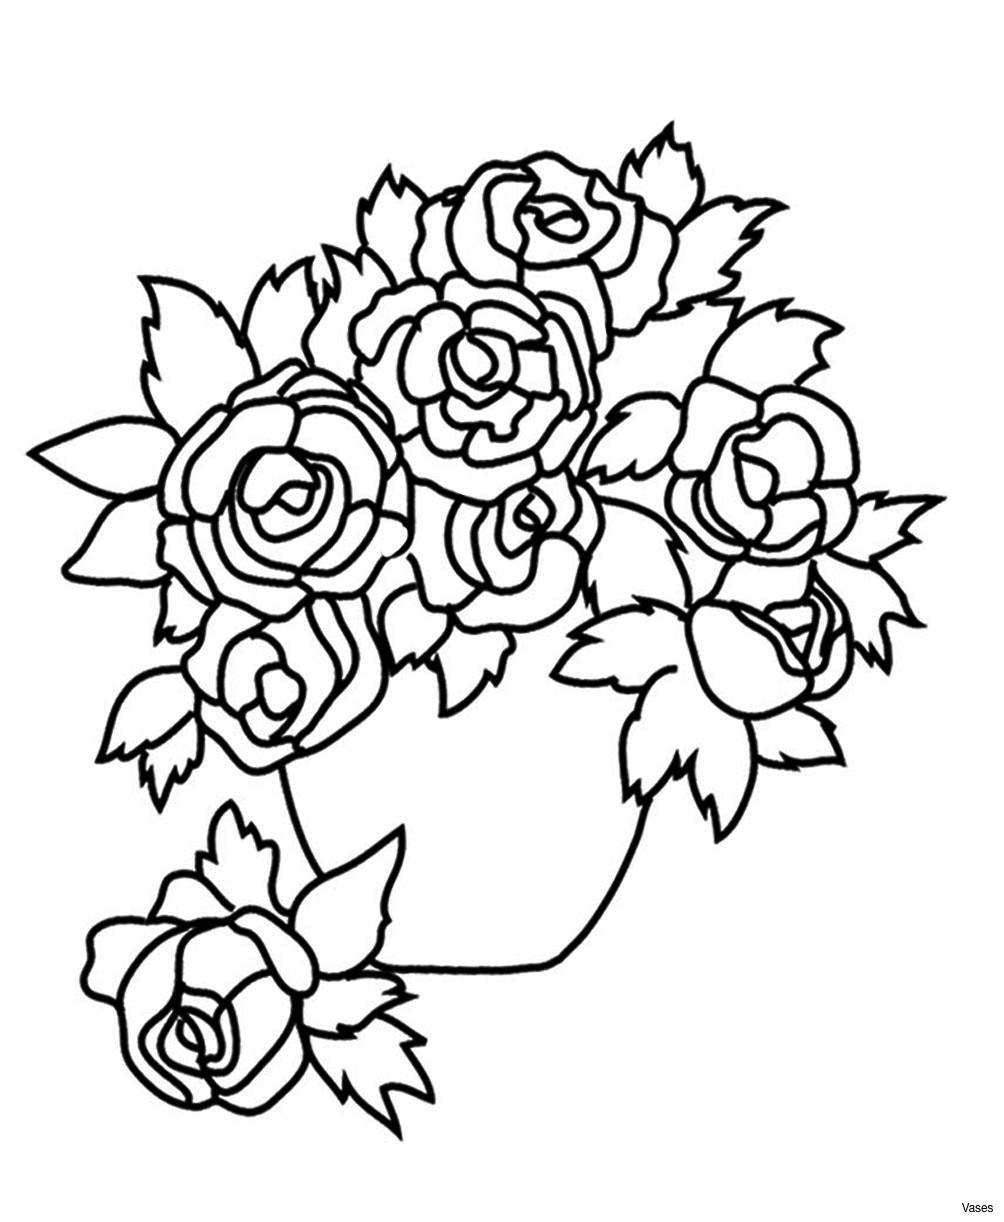 28 Cute Flower Vase Photos 2023 free download flower vase photos of cool vases flower vase coloring page pages flowers in a top i 0d inside cool coloring pages cool vases flower vase coloring page pages flowers in a top i